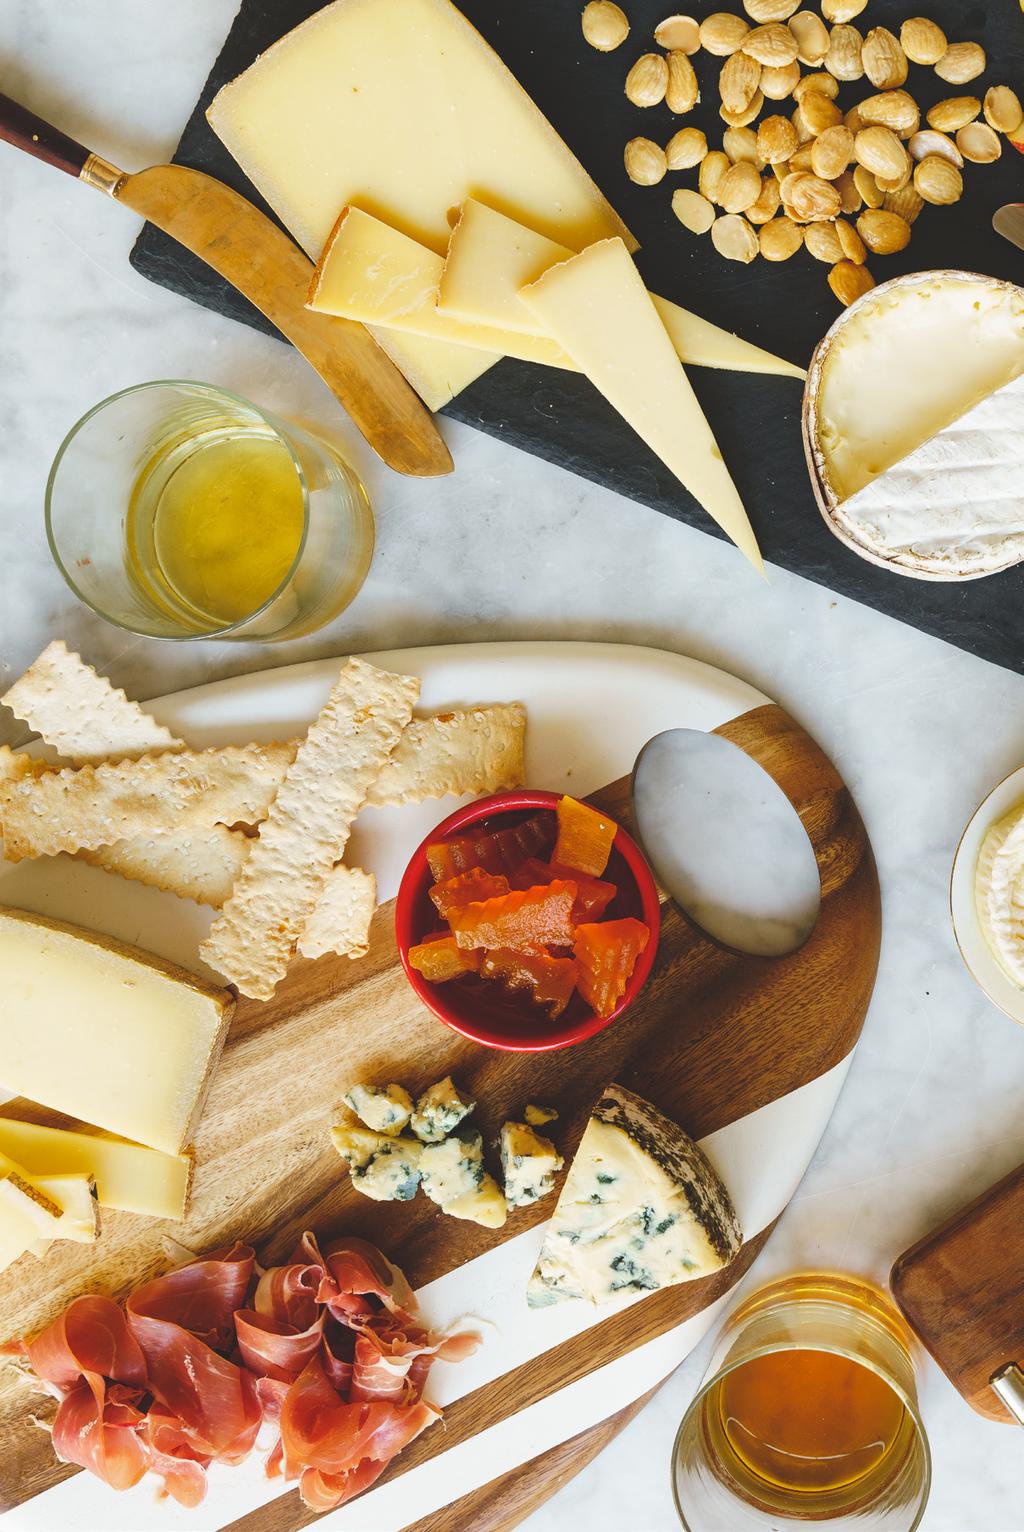 Tips for Building Your Plate 1 All cheese is best served at room temperature. Prep your cheese plate at least one hour before serving. Every guest should receive around 1 oz. of each cheese type.